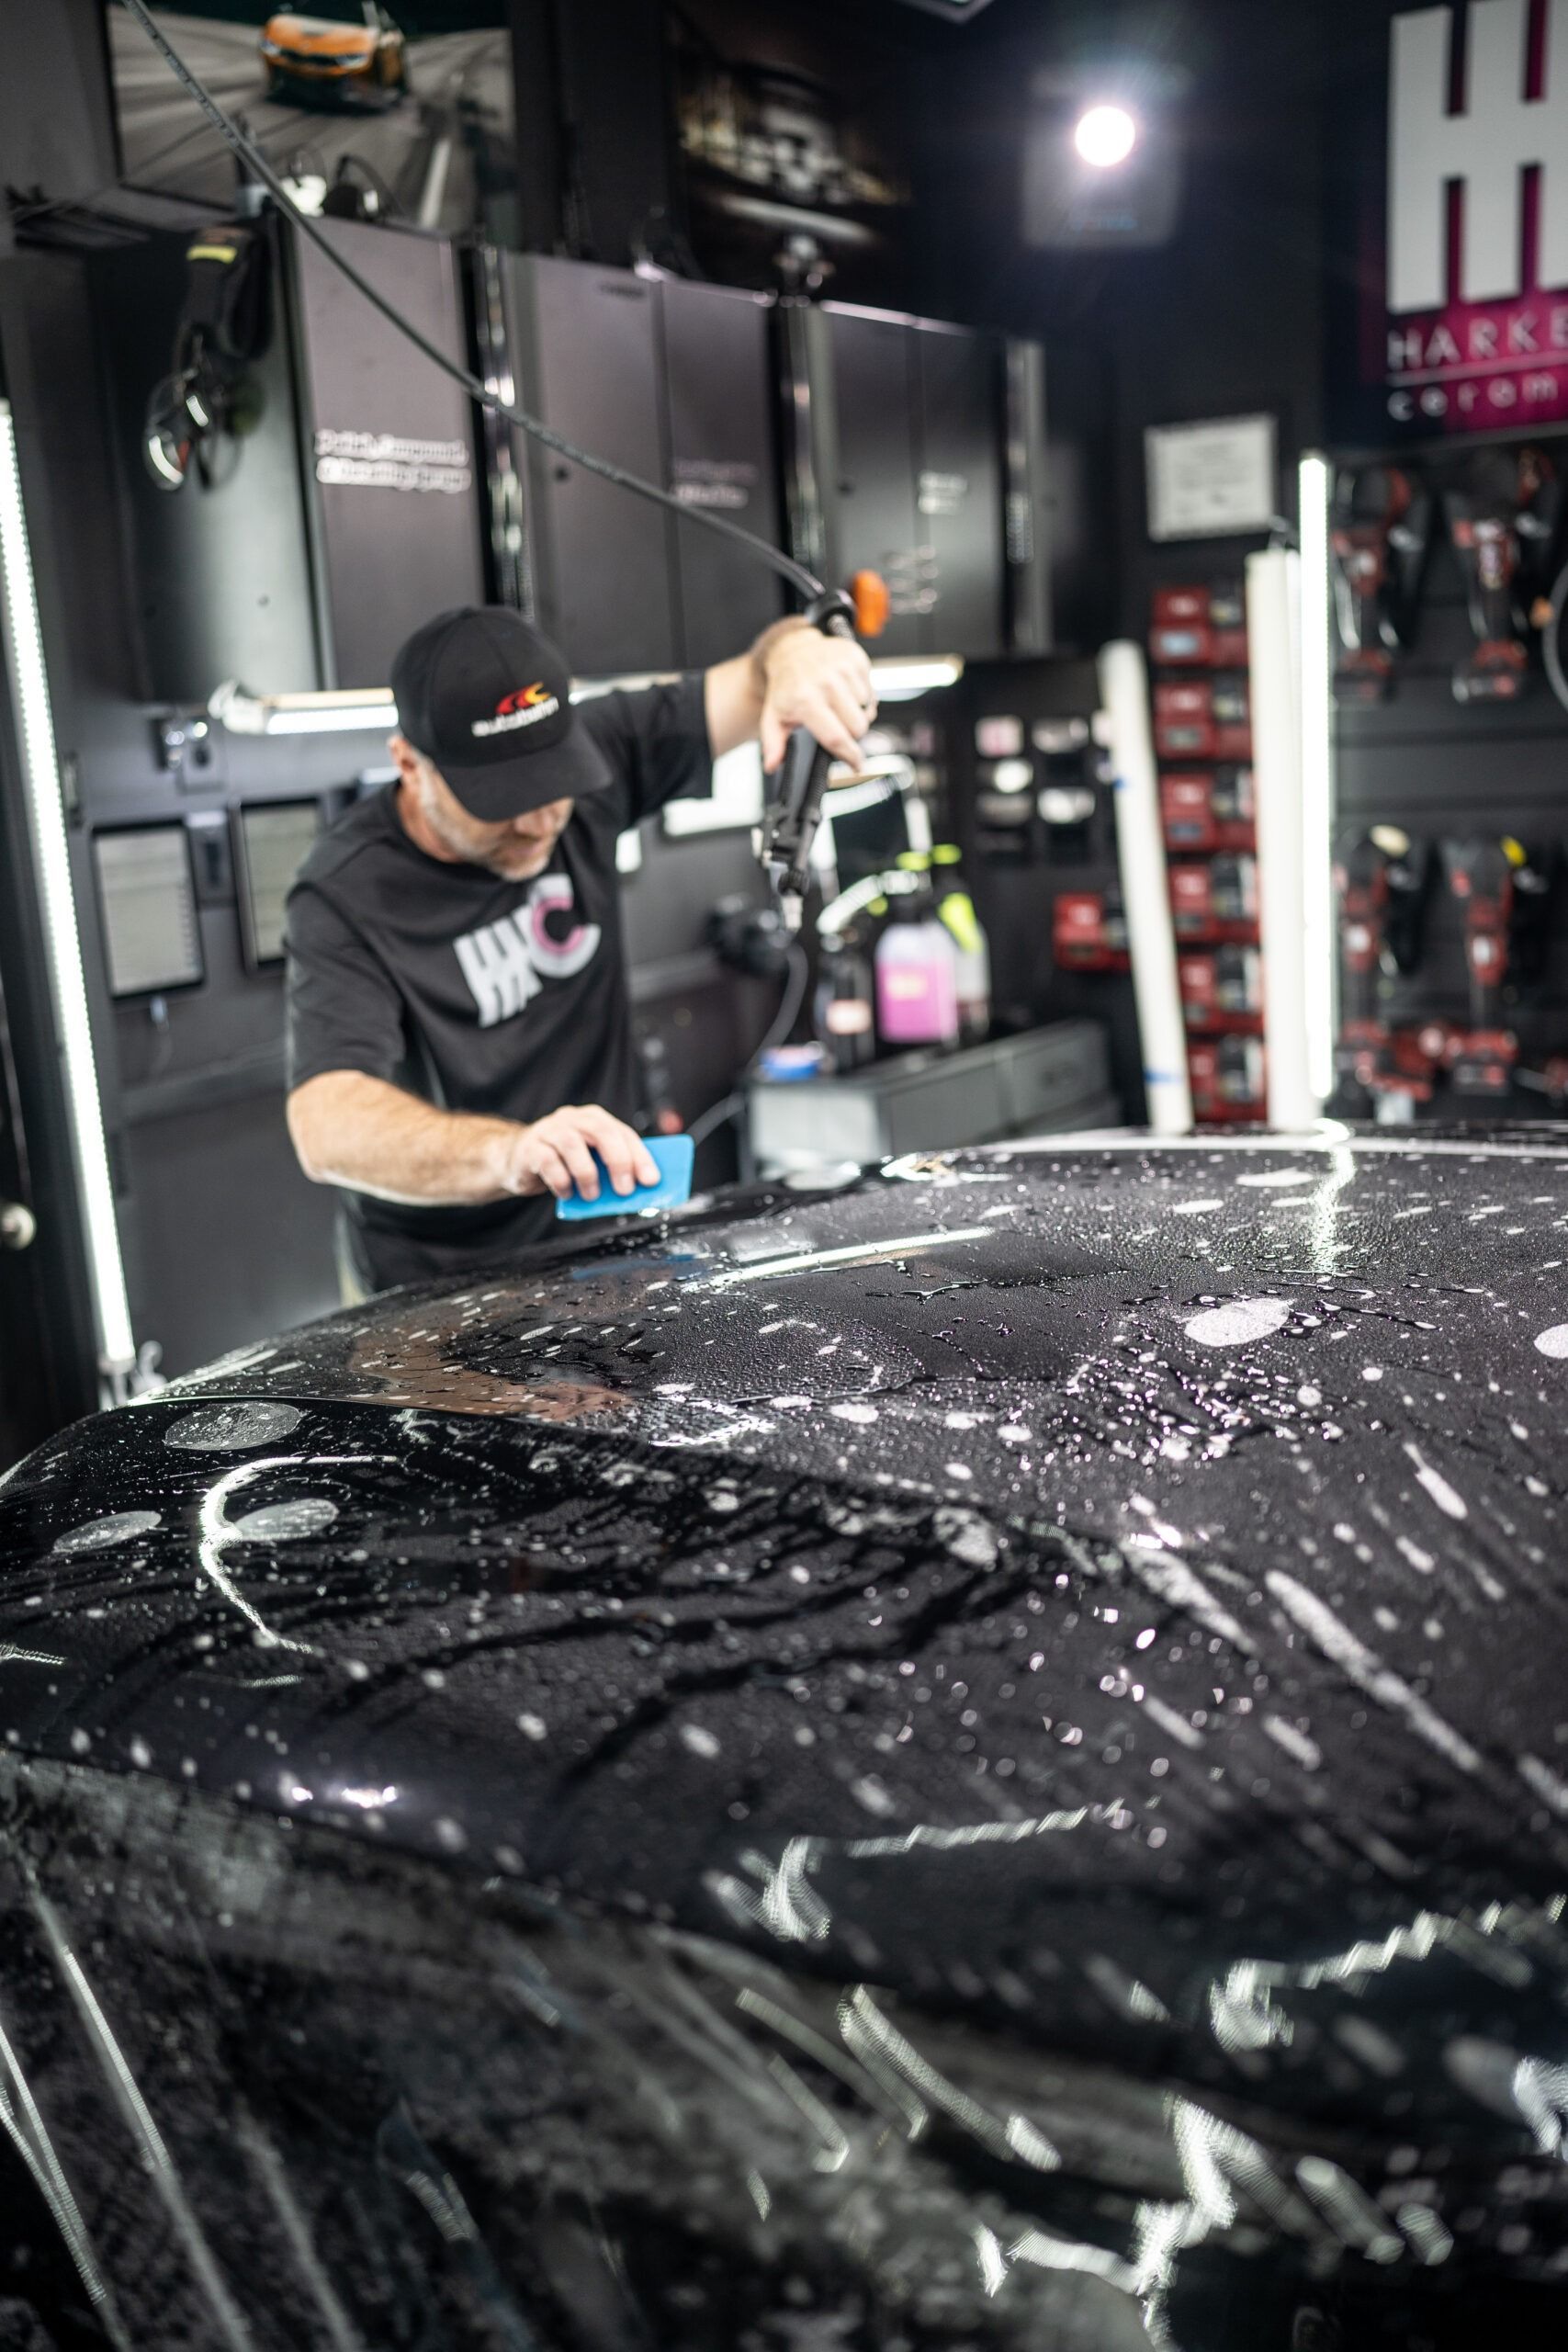 A man is wrapping a car with plastic wrap in a garage.